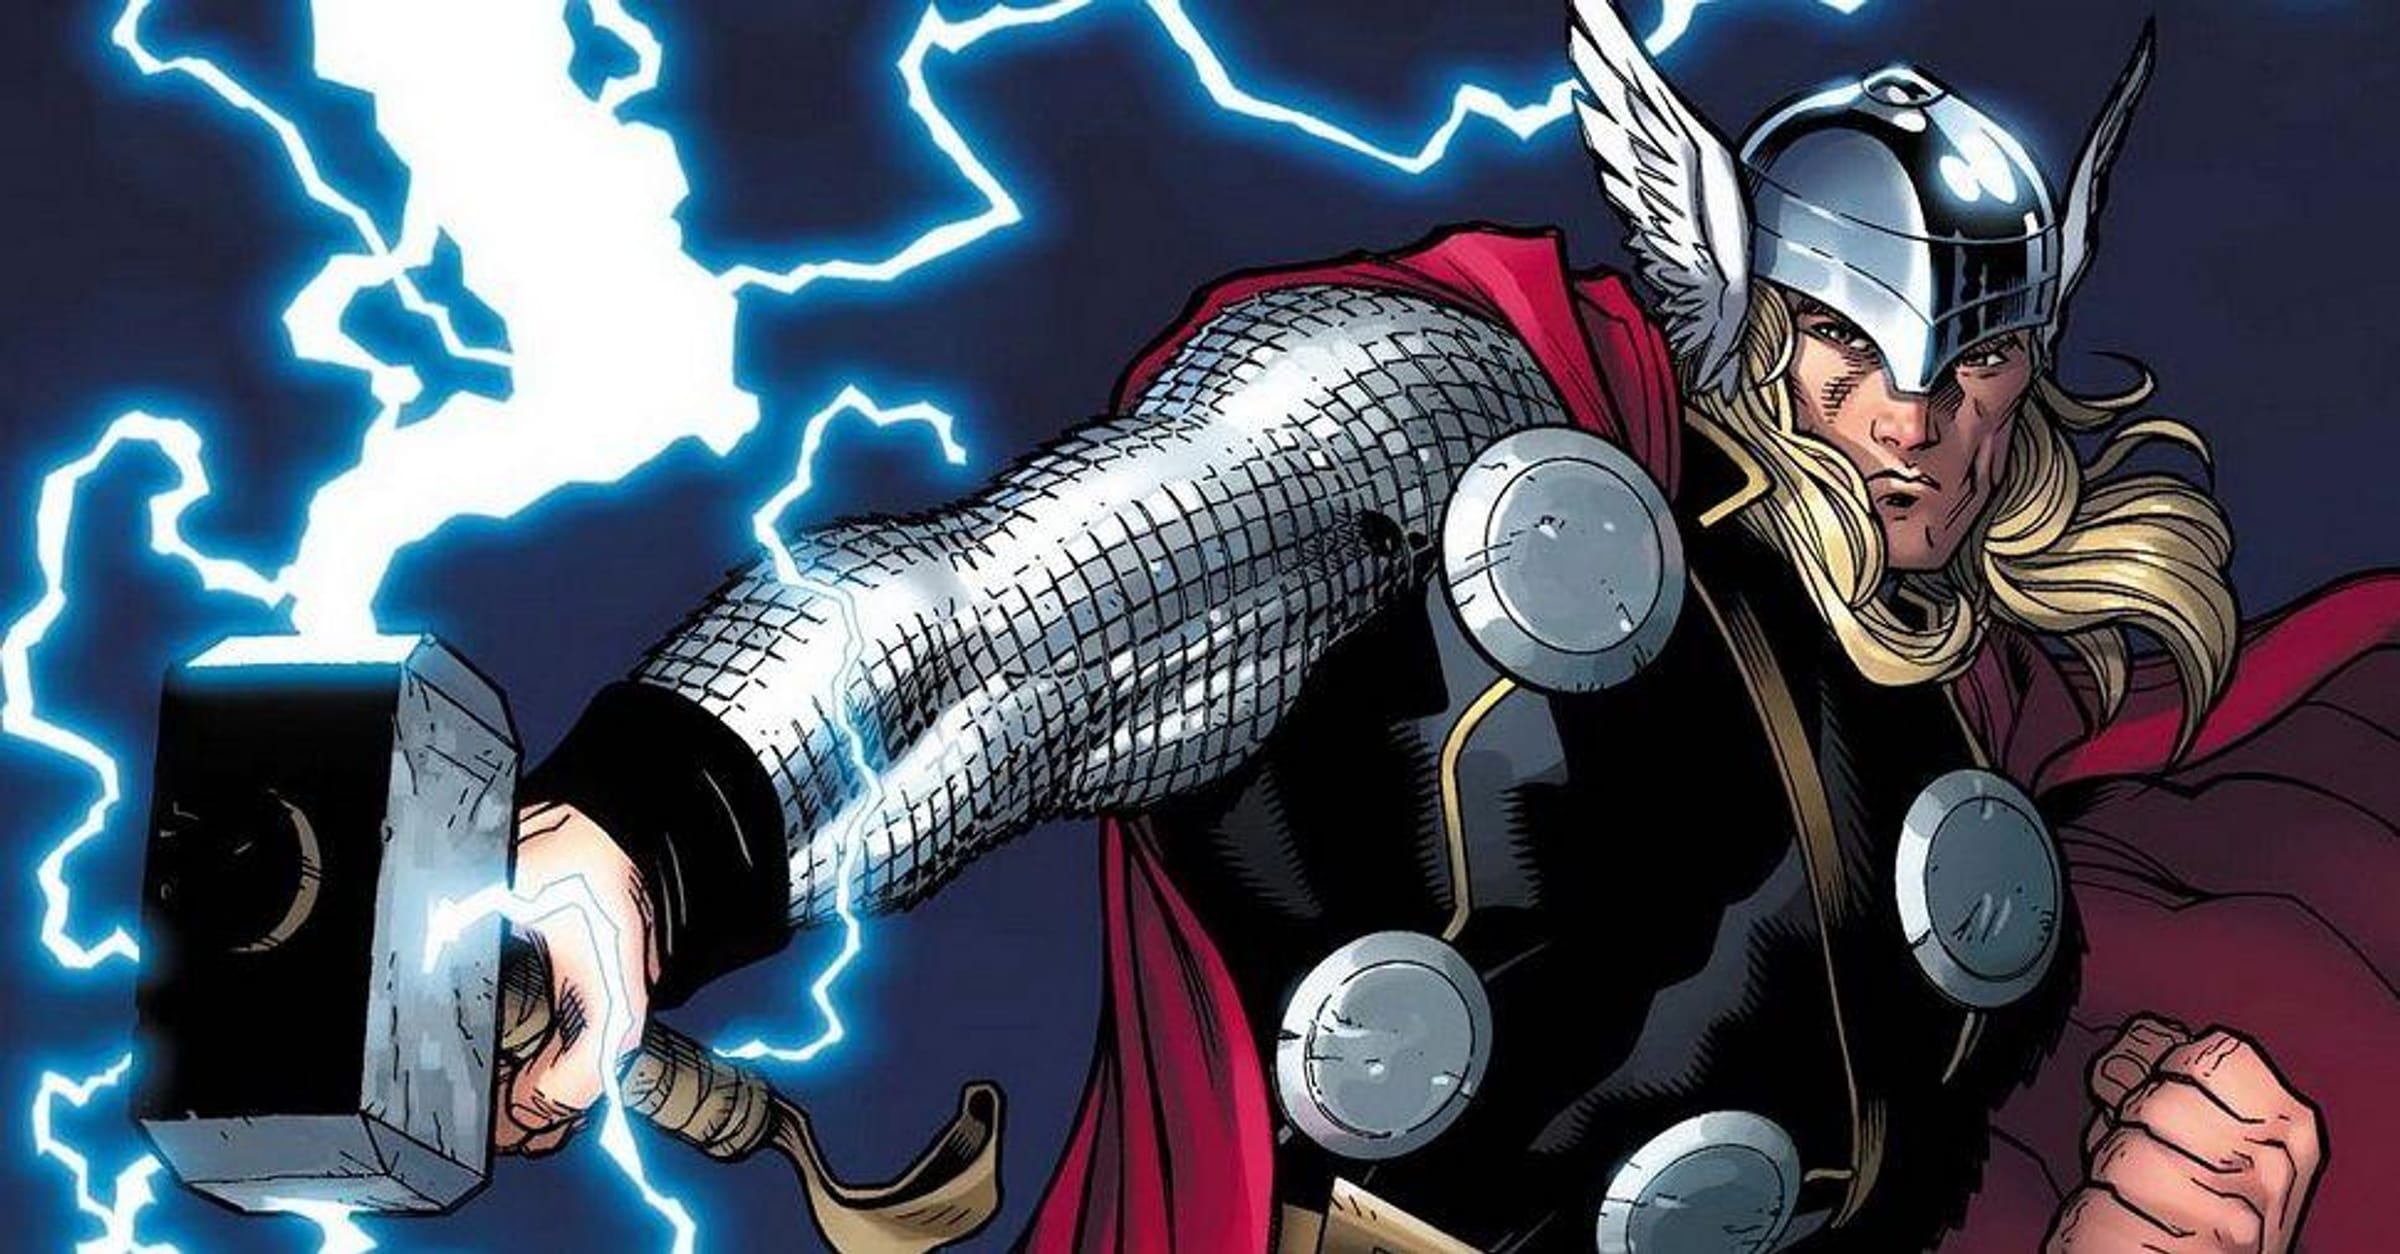 Internet Cringes as Thor: Love and Thunder Gets Worst Thor